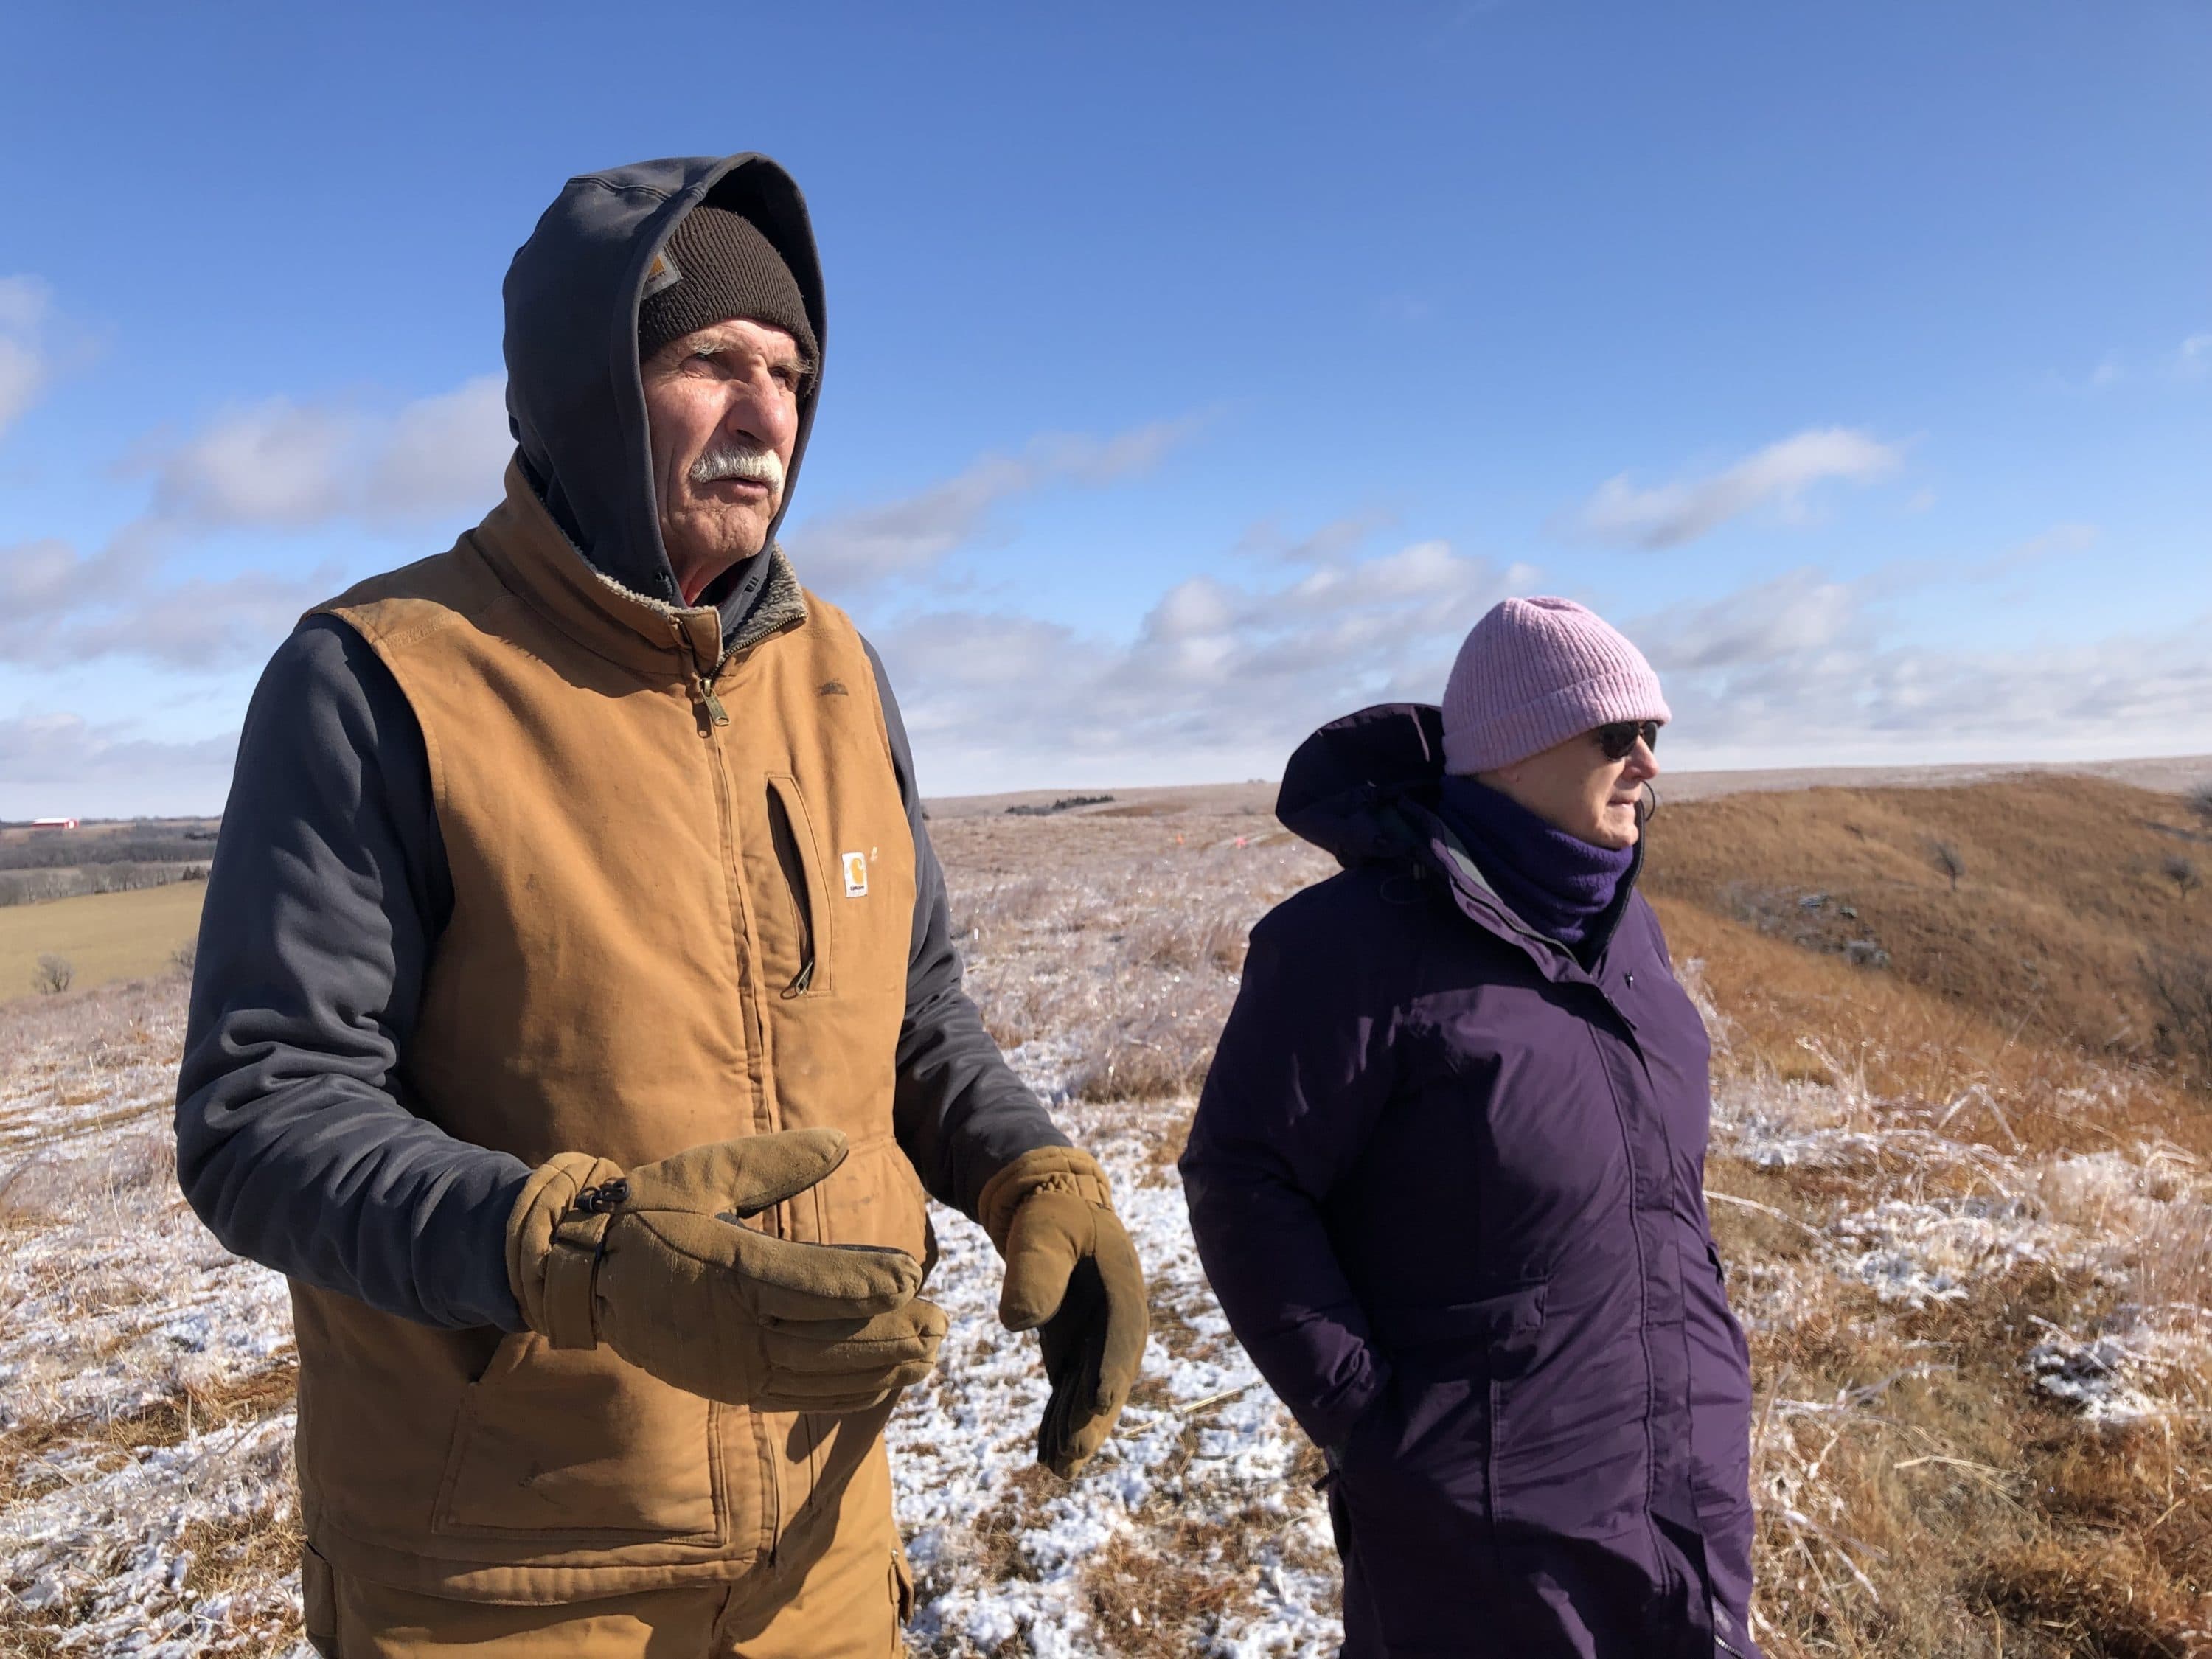 Bill and Chris Pannbacker regularly visit this ridge on their farm to watch workers cleaning the Keystone pipeline oil spill. (Celia Llopis-Jepsen/Kansas News Service)